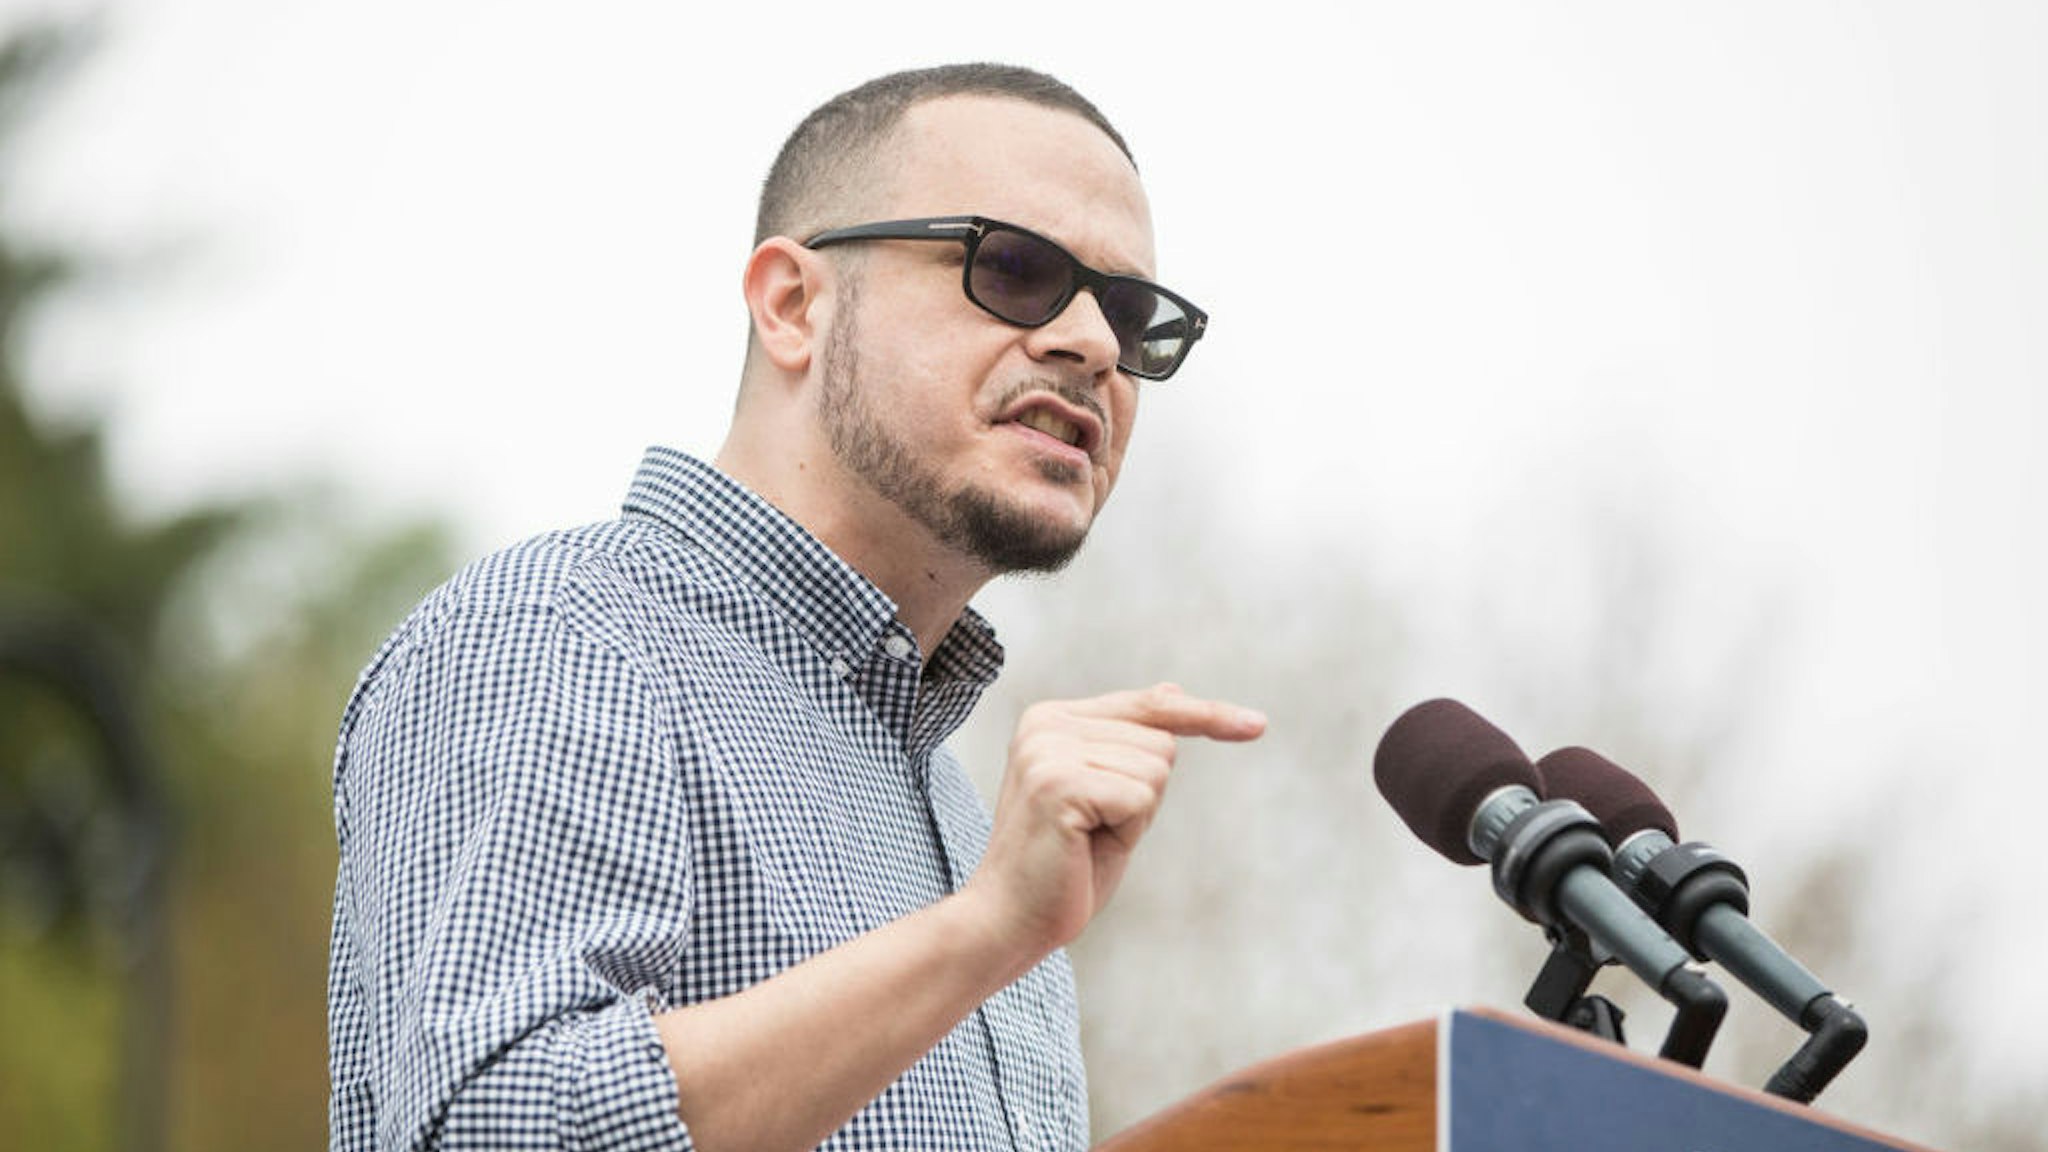 MONTPELIER, VT - MAY 25: Shaun King introduces Democratic presidential candidate Bernie Sanders during a rally in the capital of his home state of Vermont on May 25, 2019 in Montpelier, Vermont. This was the first Vermont rally of Sanders' 2020 campaign. (Photo by Scott Eisen/Getty Images)